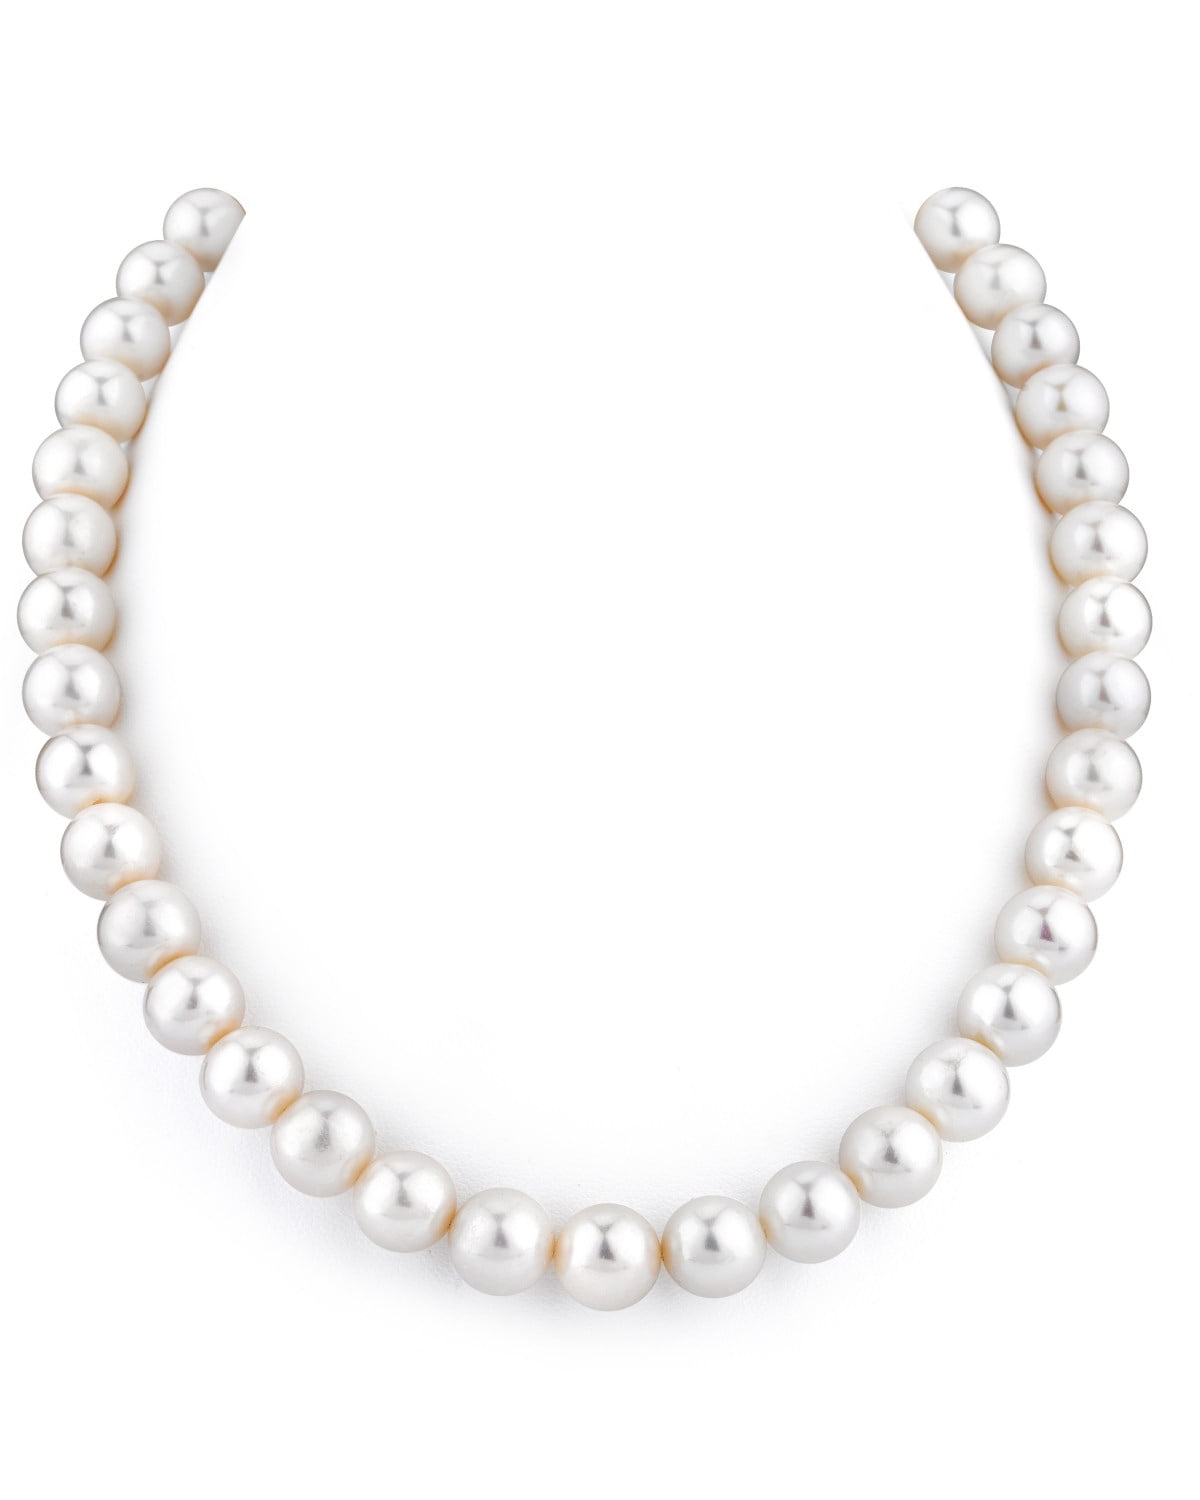 925 Sterling Silver Rhod-plat 10-11mm White Freshwater Cultured Pearl Necklace 17 Inch